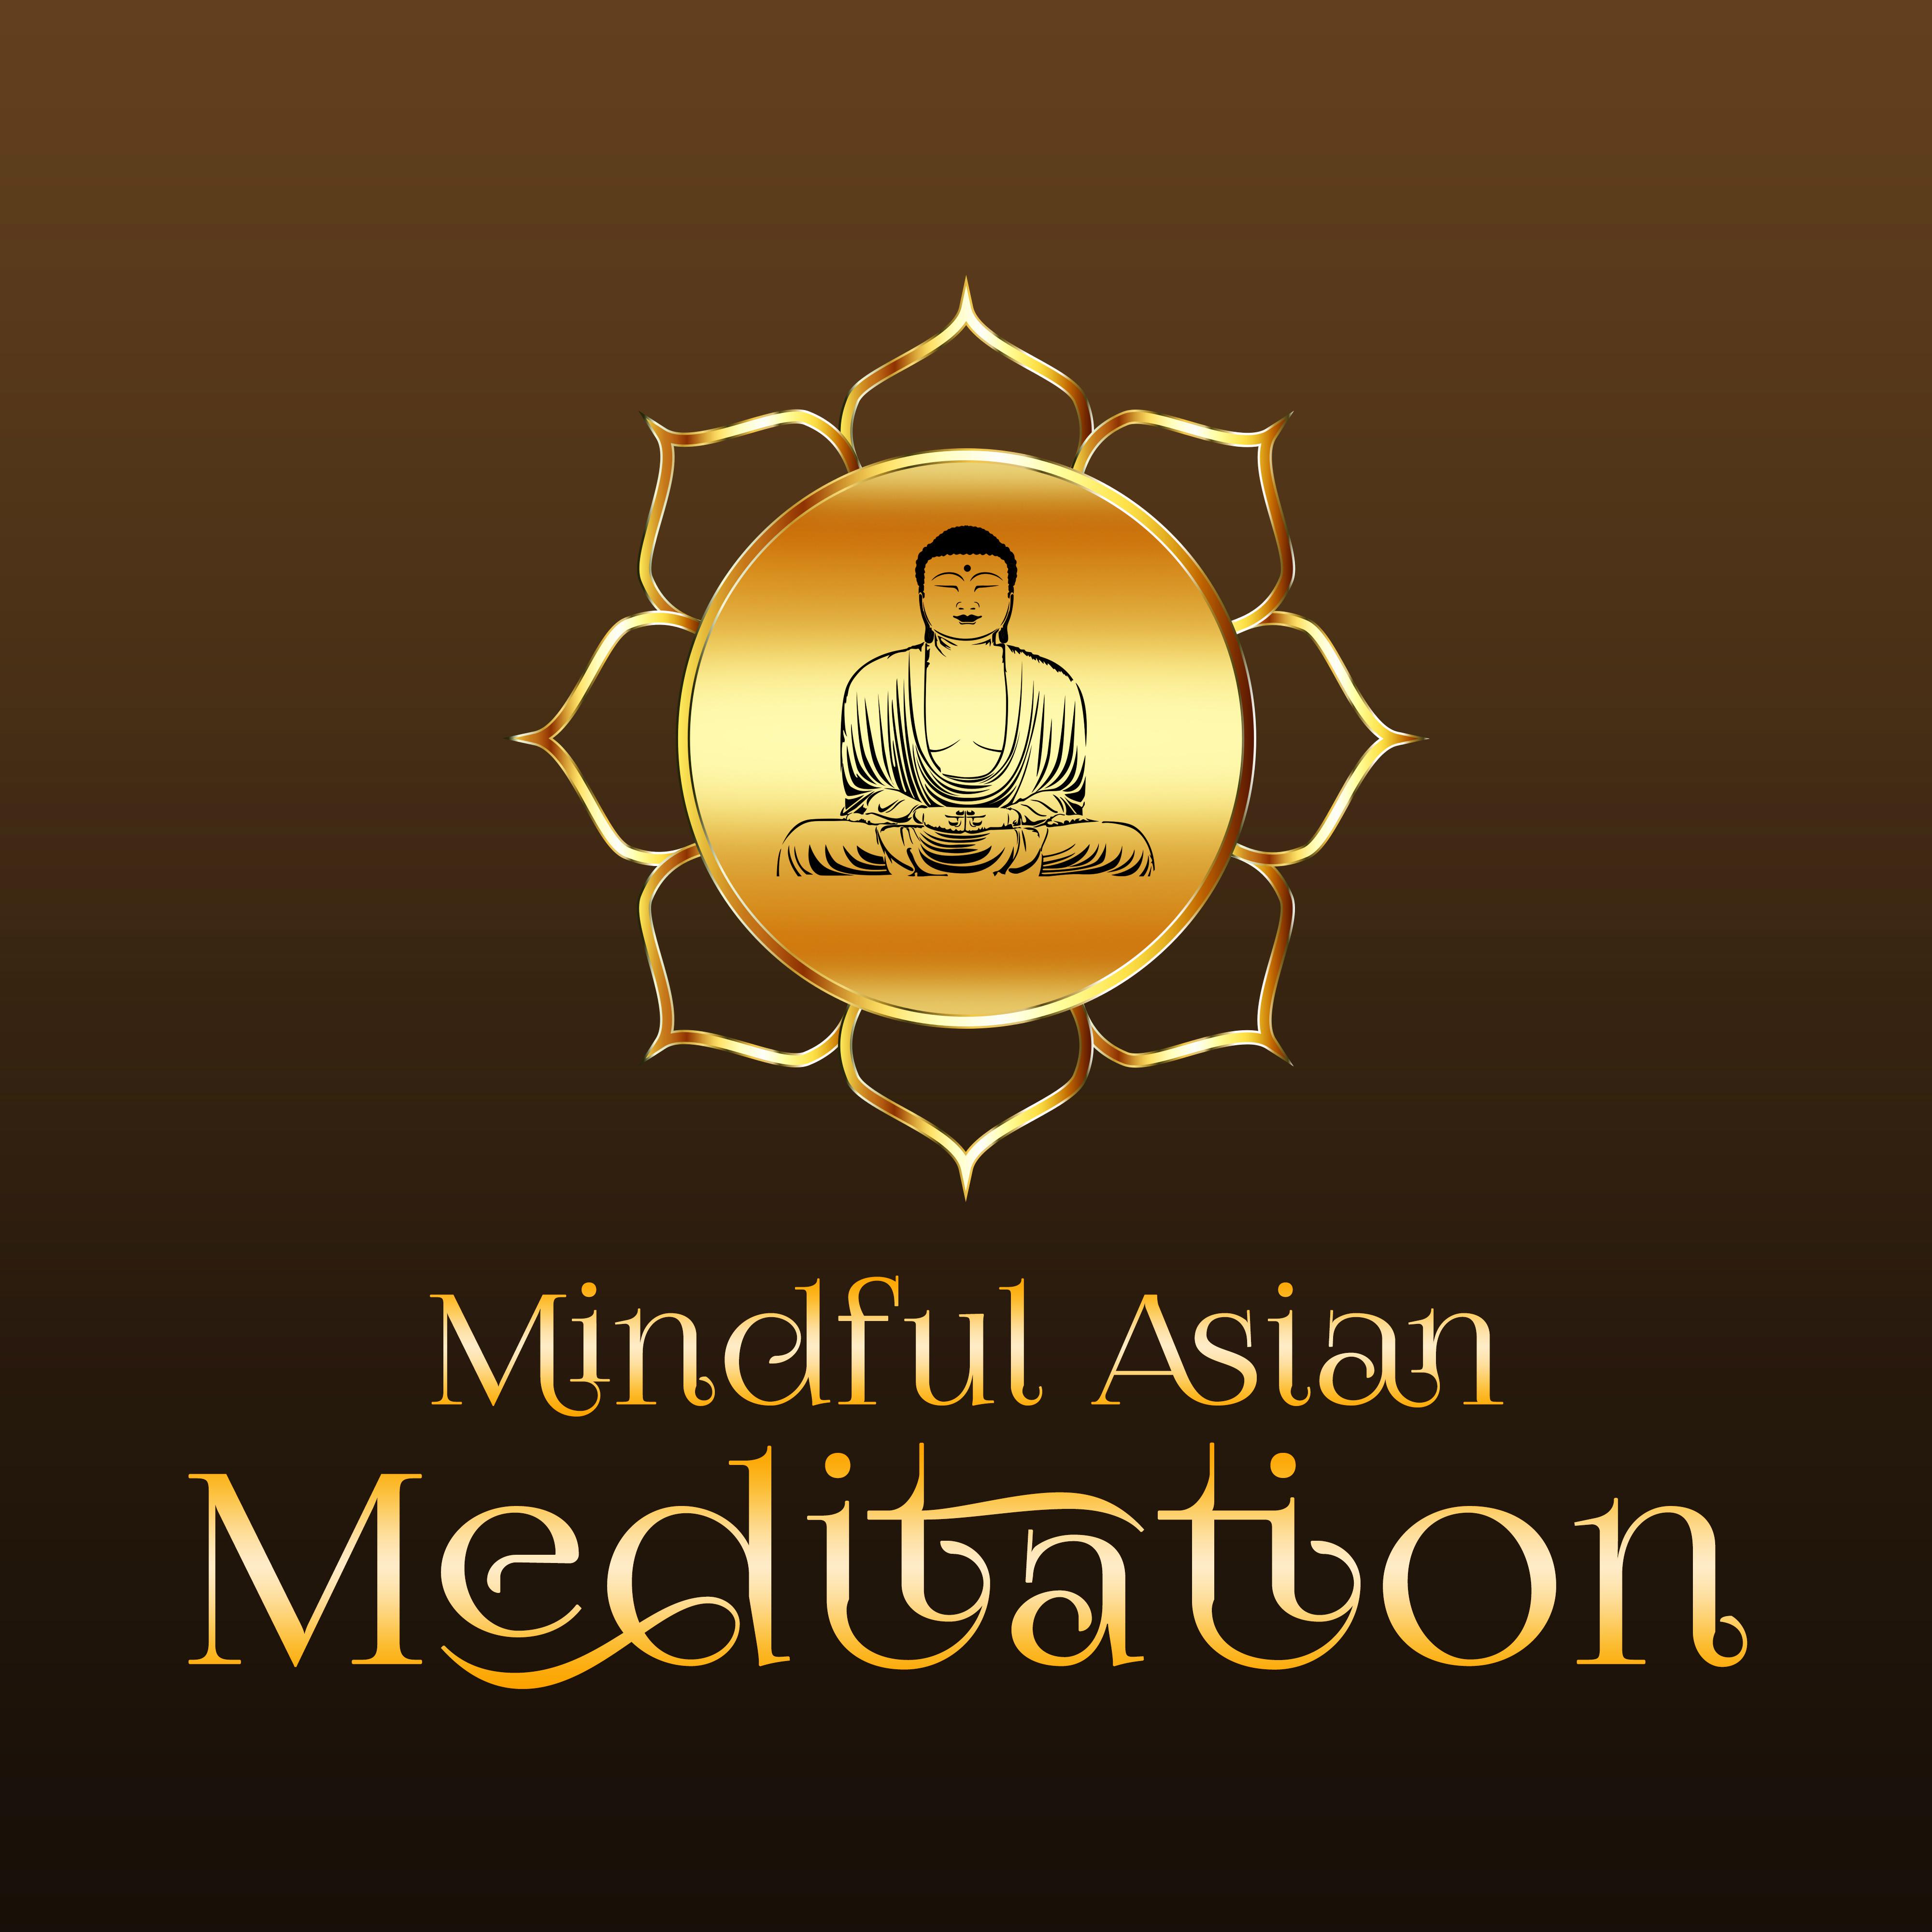 Mindful Asian Meditation  Soothing and Calm Sounds for Meditations, New Age Healing, Deep Breathing Meditation